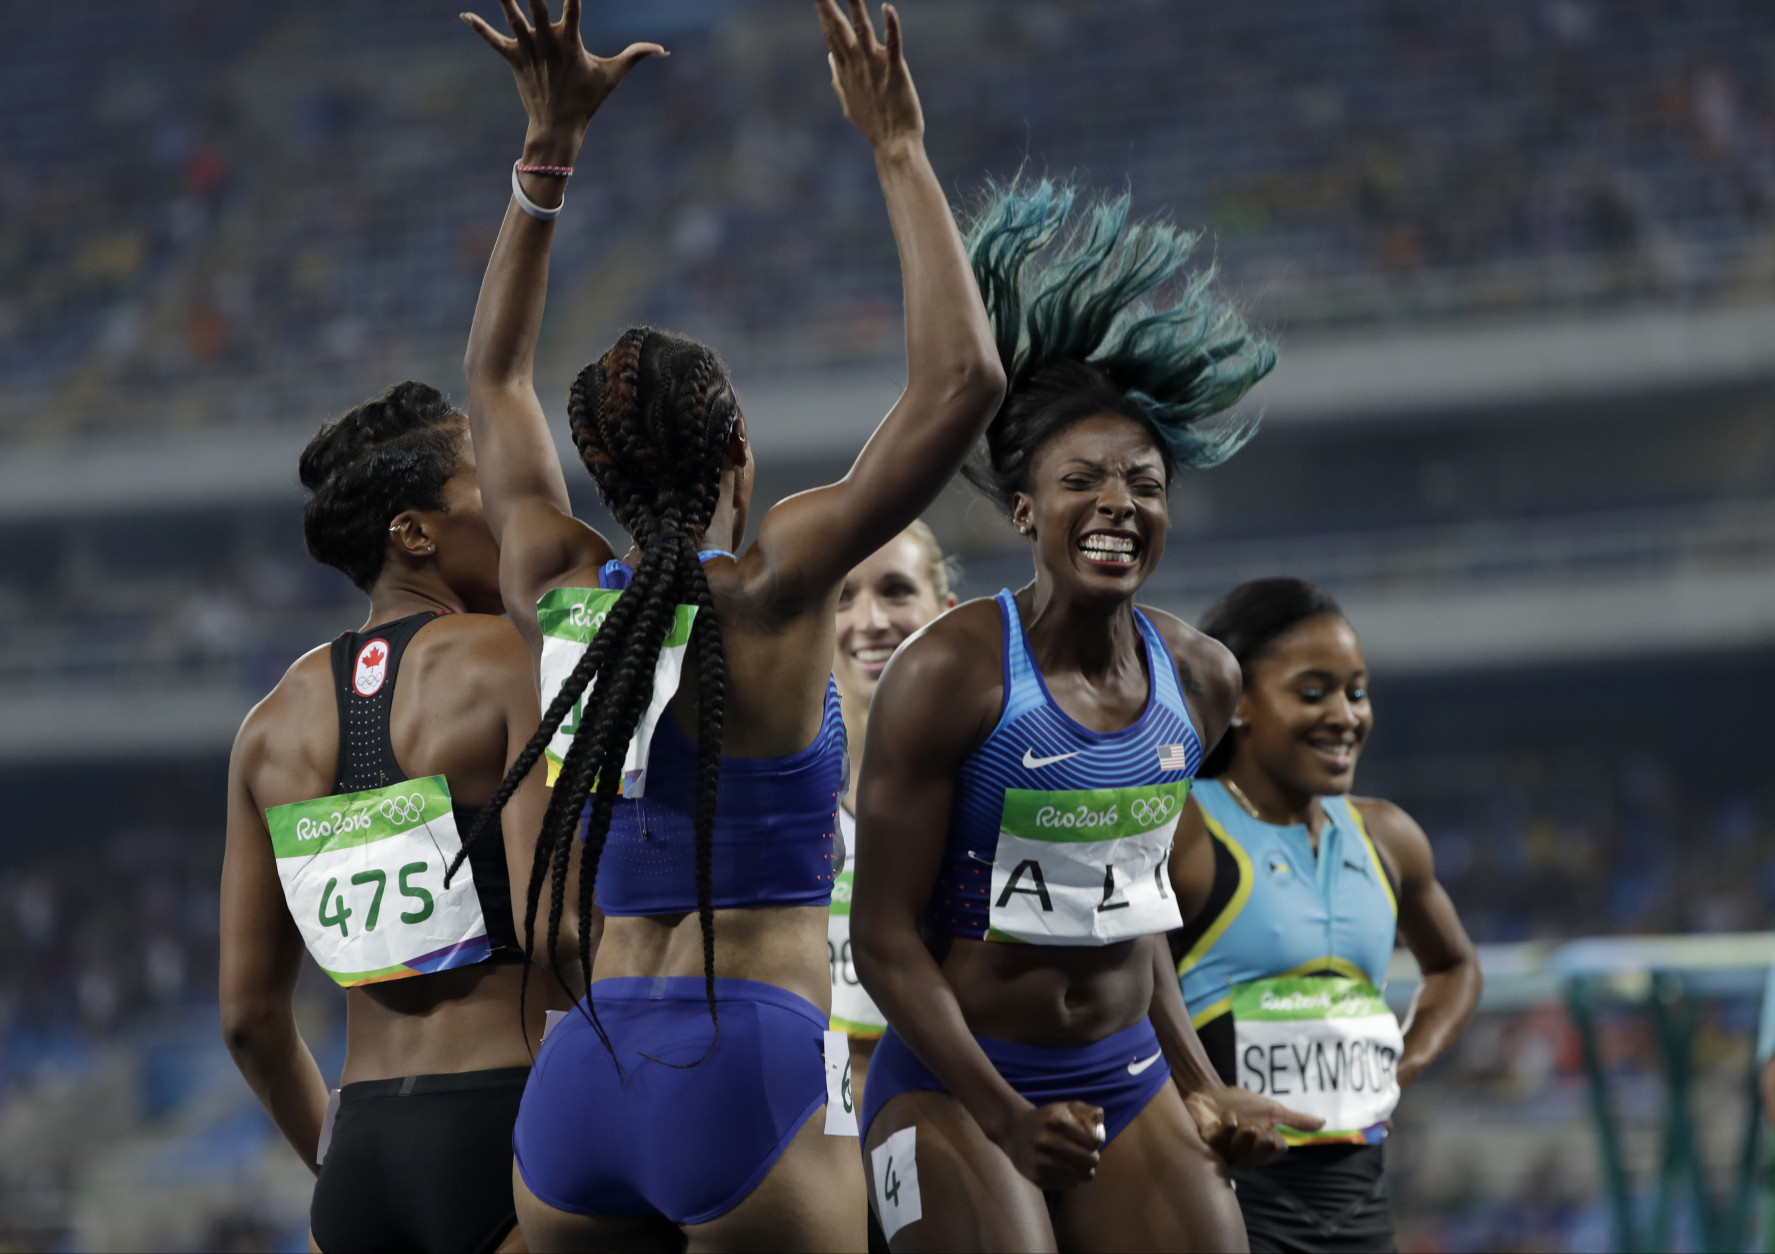 Brianna Rollins from the United States, center left, celebrates winning the gold medal in the women's 100-meter hurdles final with second placed United States' Nia Ali, center right, during the athletics competitions of the 2016 Summer Olympics at the Olympic stadium in Rio de Janeiro, Brazil, Wednesday, Aug. 17, 2016. (AP Photo/David J. Phillip)